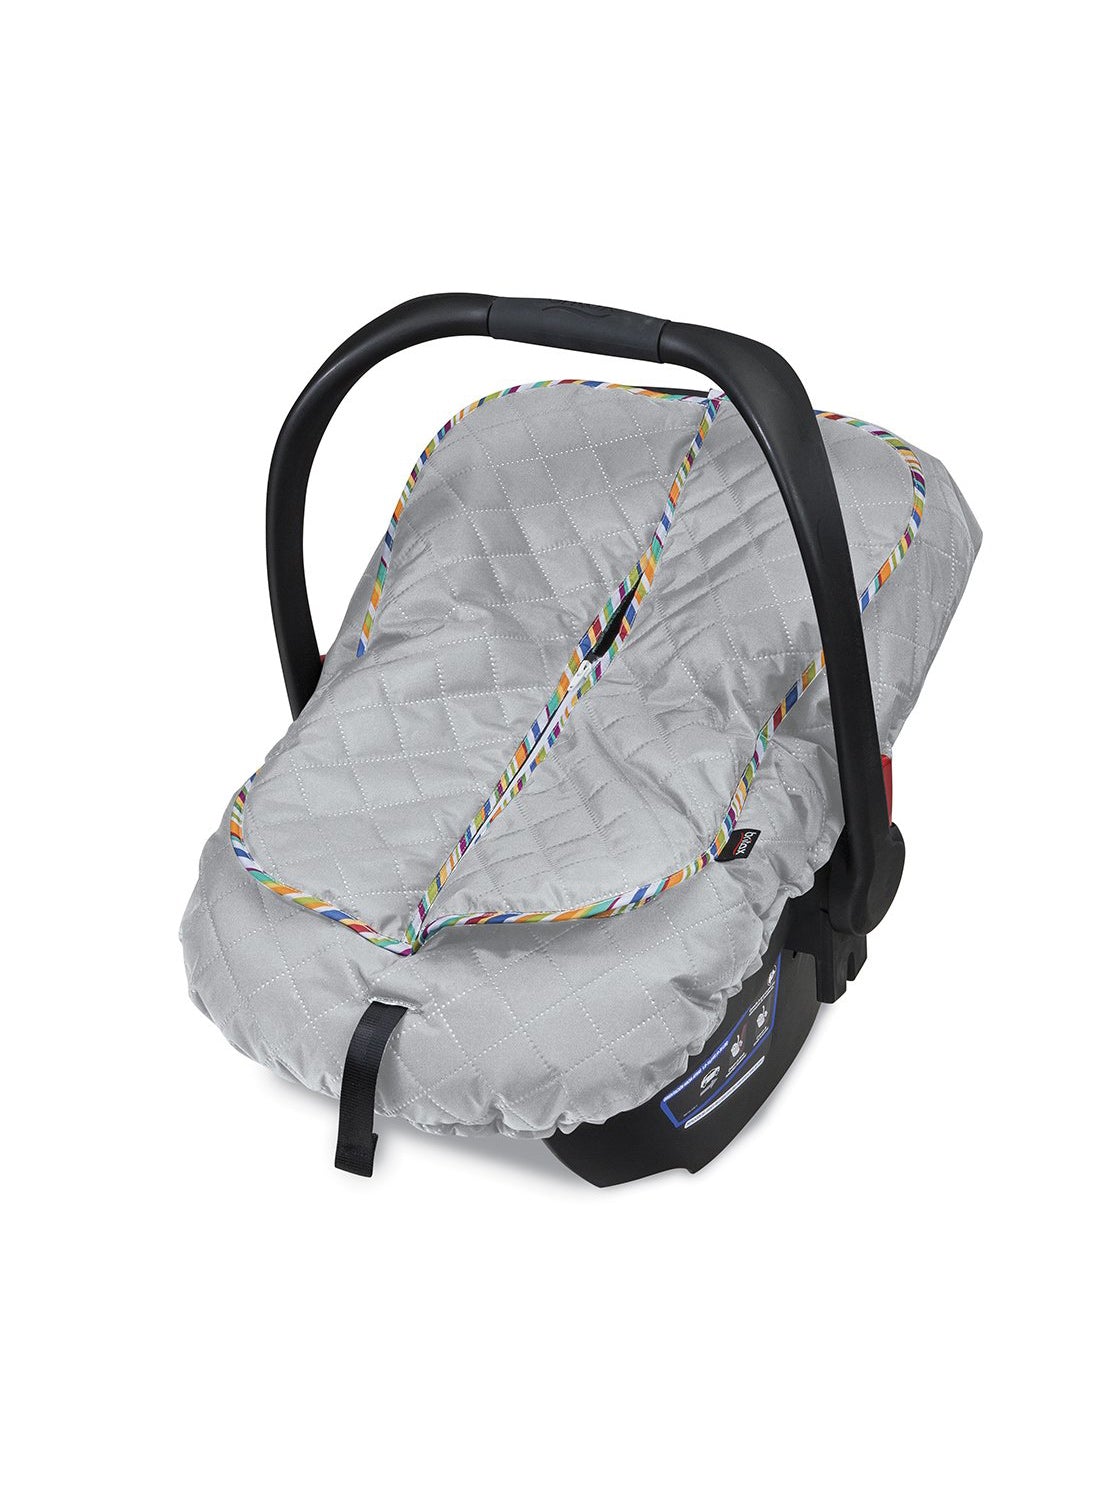 Britax B-Warm Insulated Infant Car Seat Cover - ANB Baby -$50 - $75